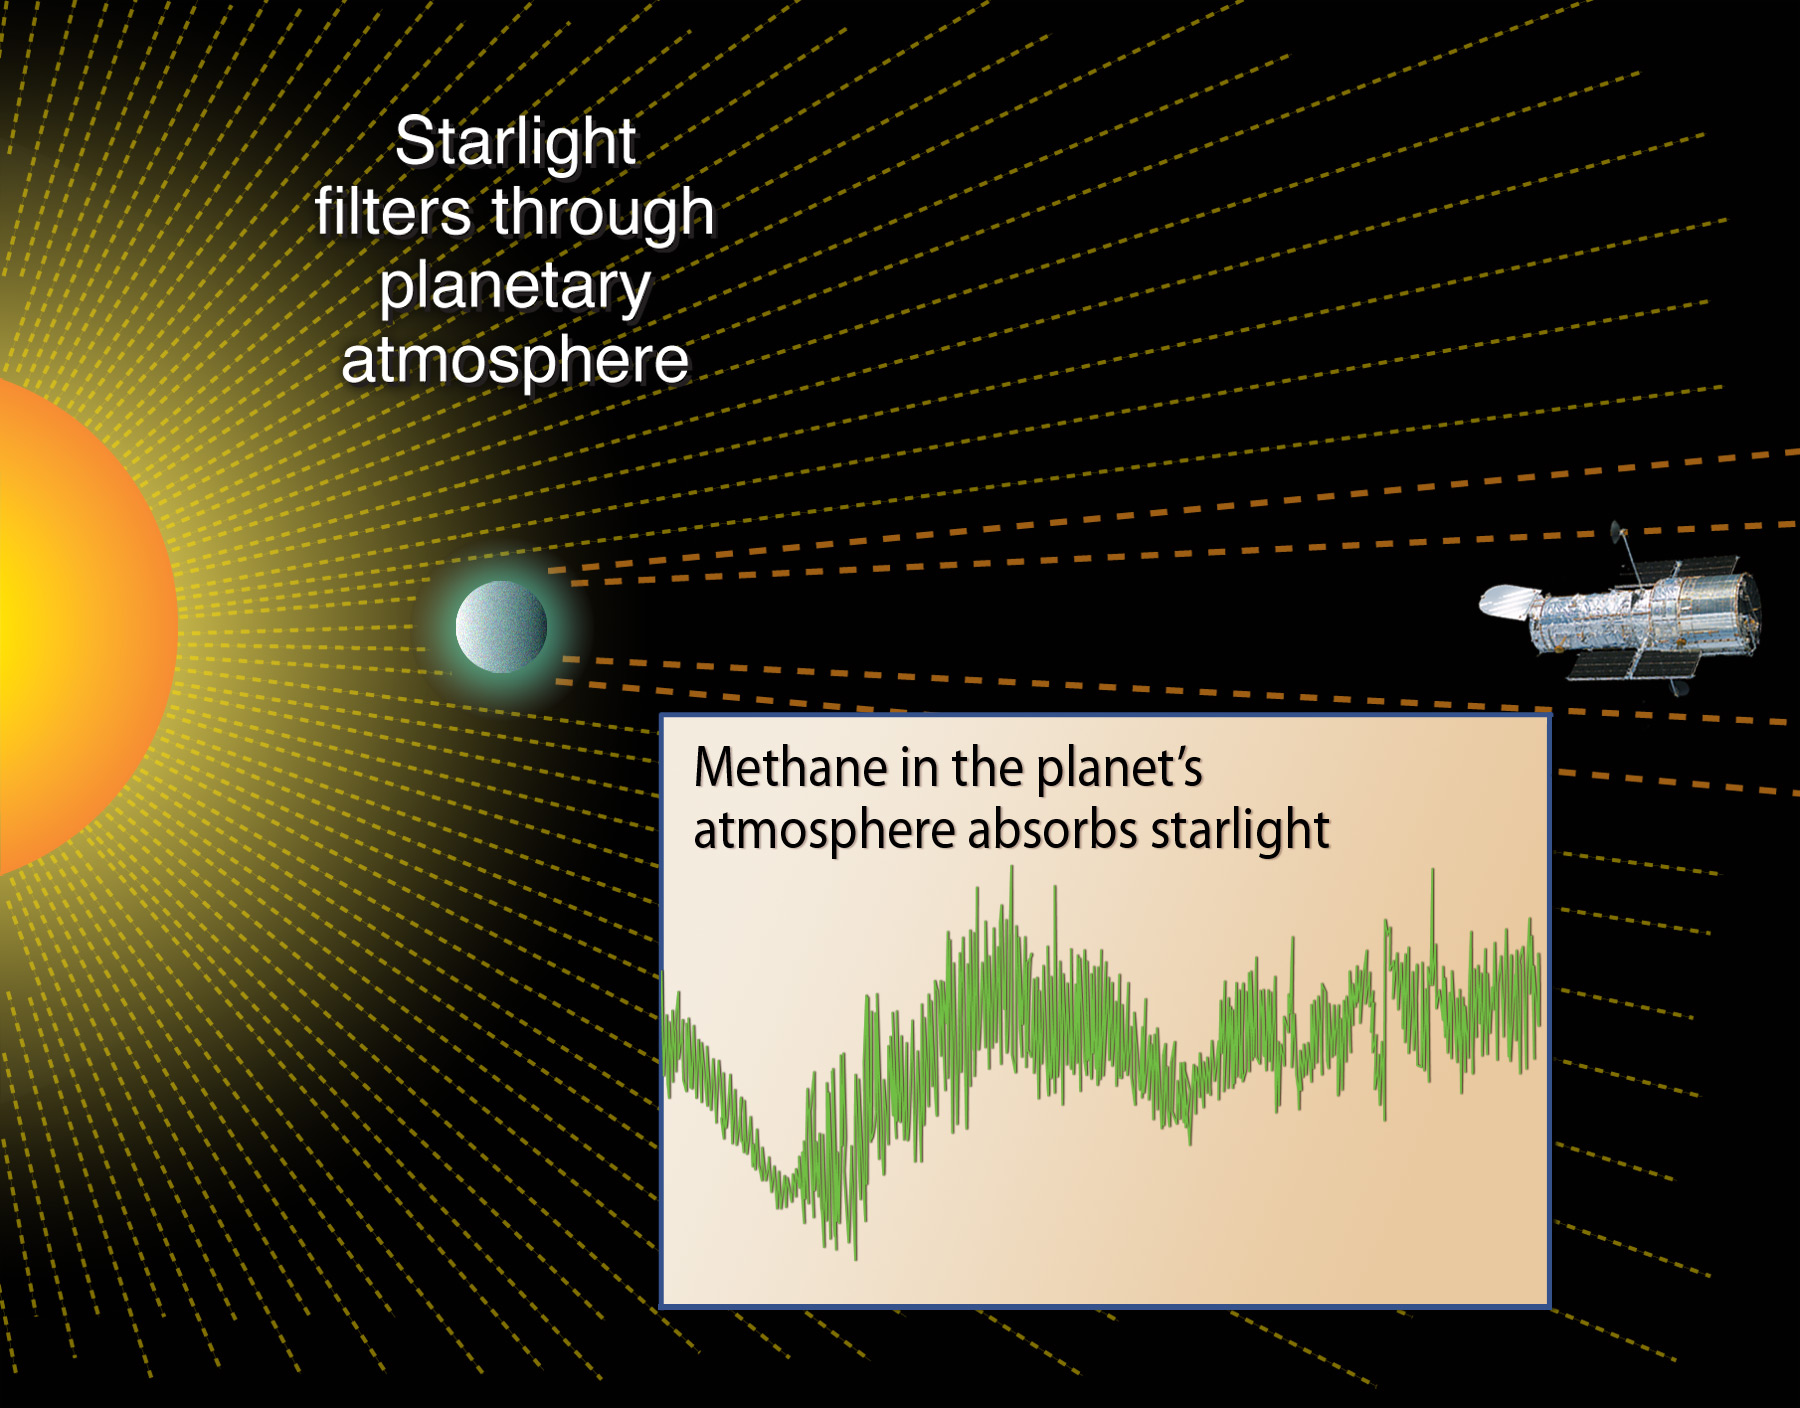 Illustration: Bright orange-yellow star off of the page to the left. A small world orbits it. Hubble is on the right side, opposite the star and planet, pointing toward them. The bottom of the illustration holds a graph of the methane absorption.